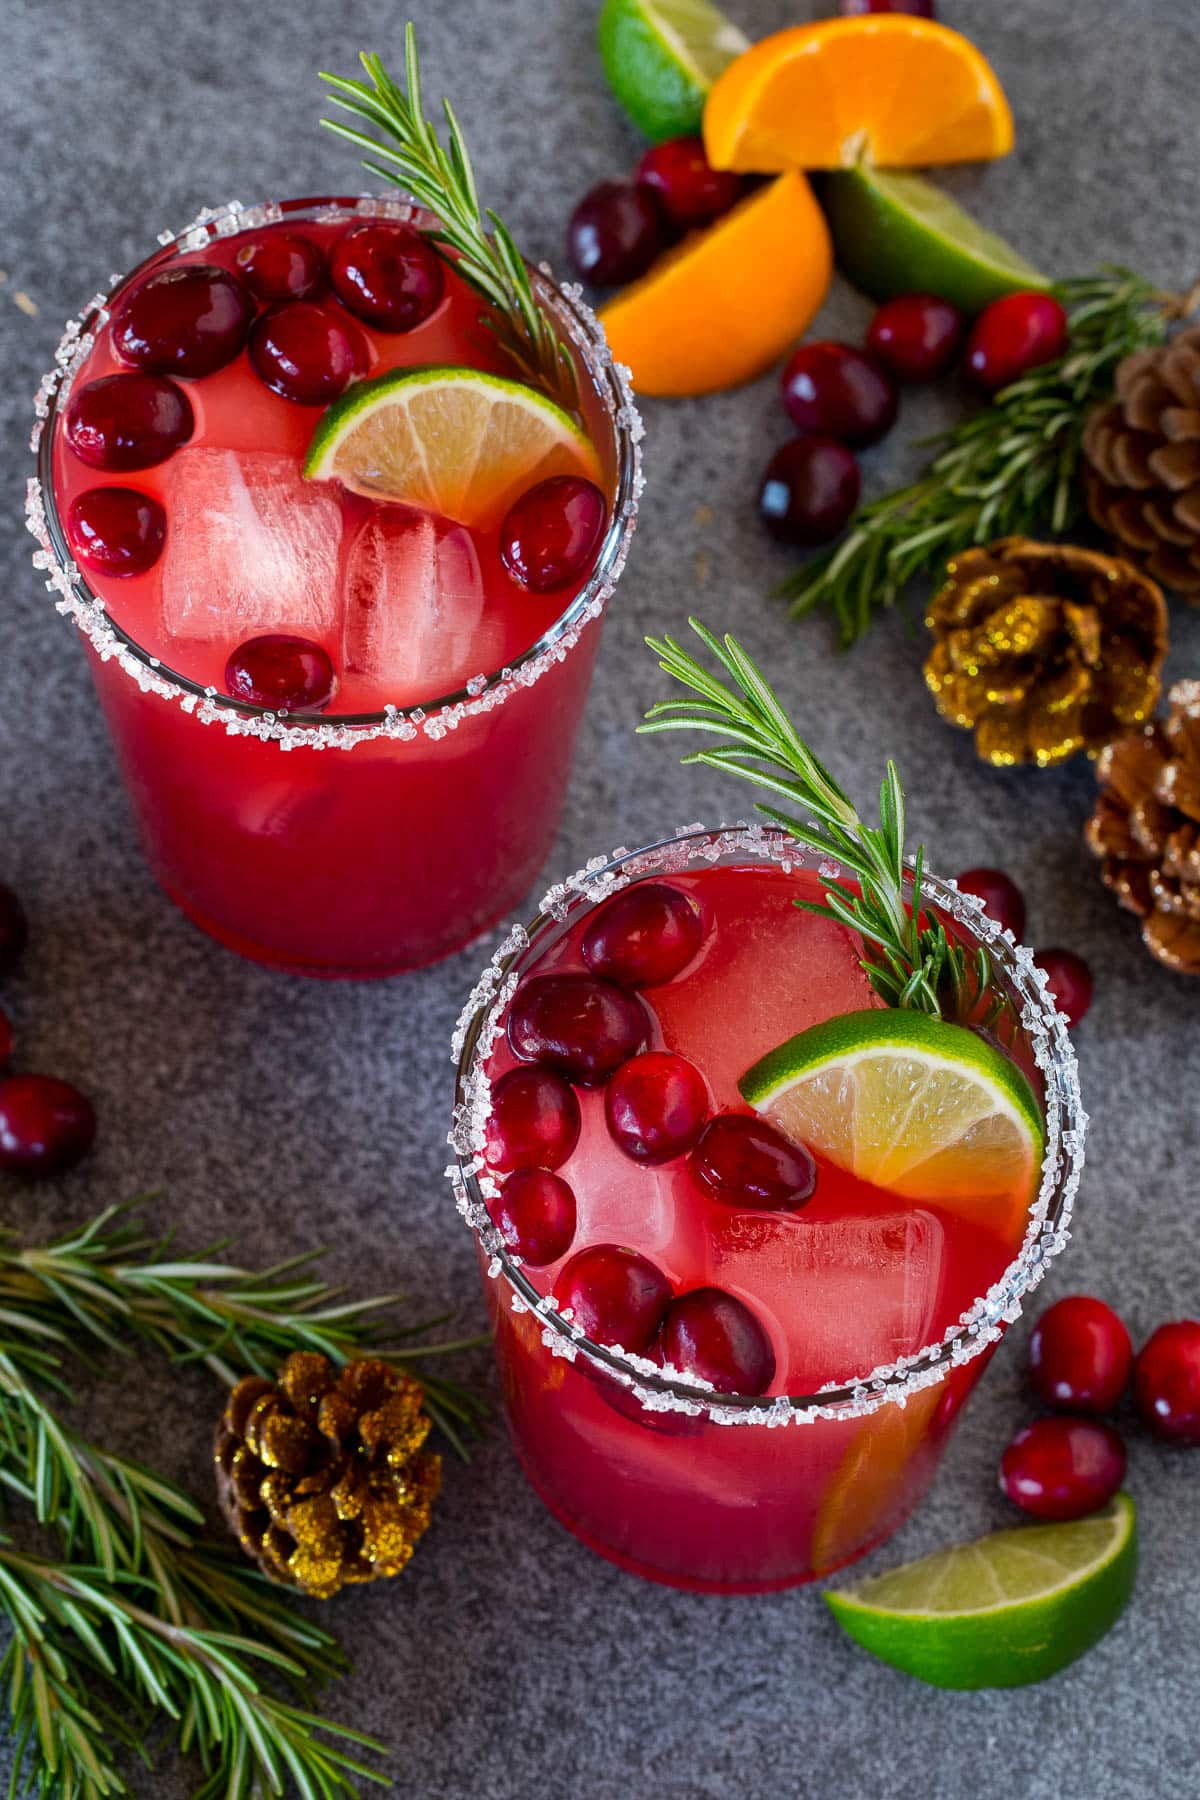 Two glasses of Christmas margarita with sugar rims and garnishes of fresh cranberries and rosemary.